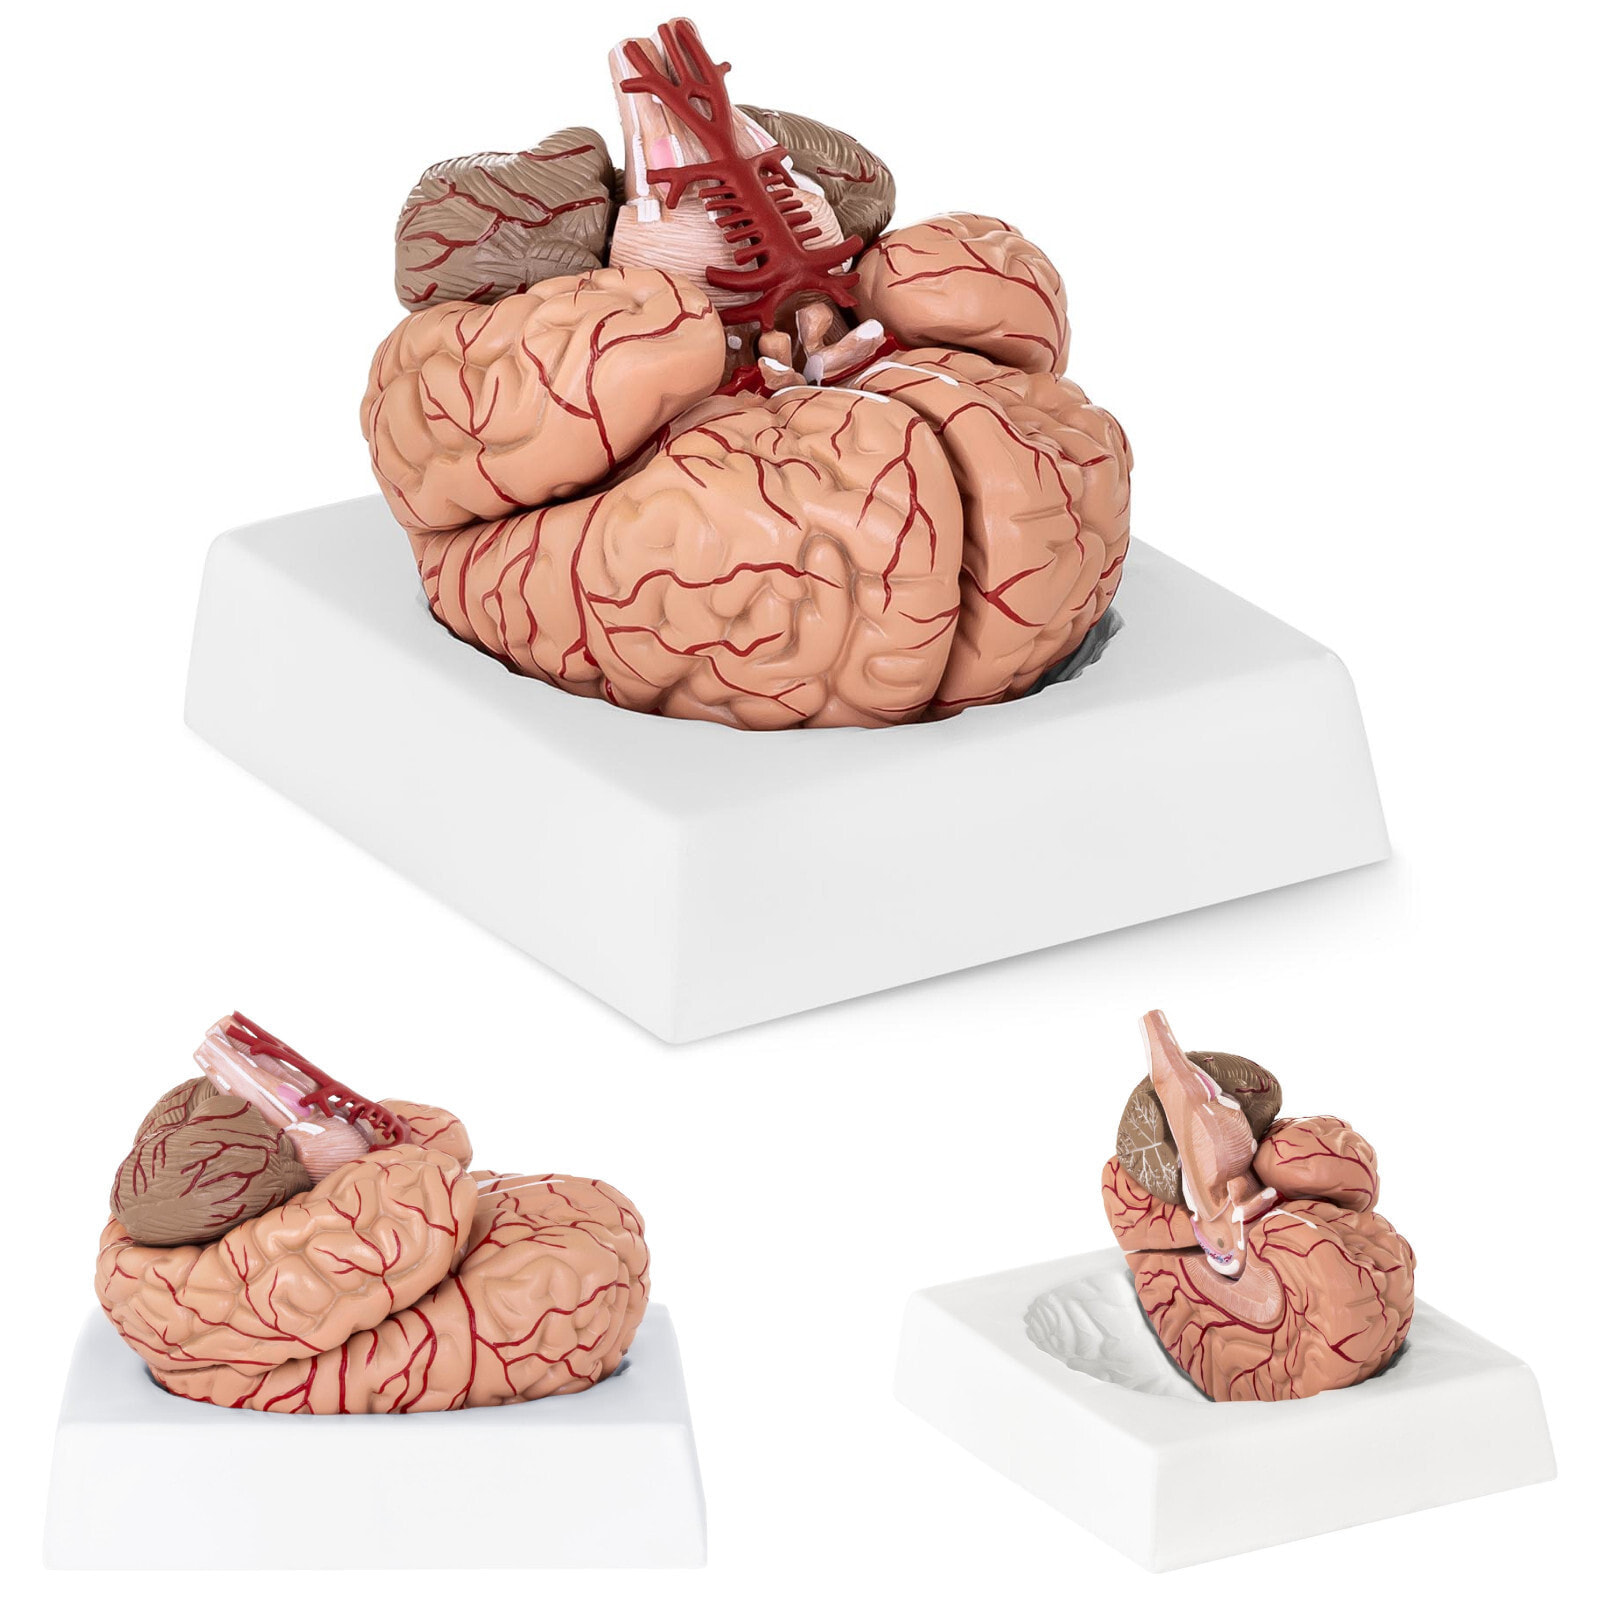 Anatomical model of the human brain 9 elements in a 1: 1 scale